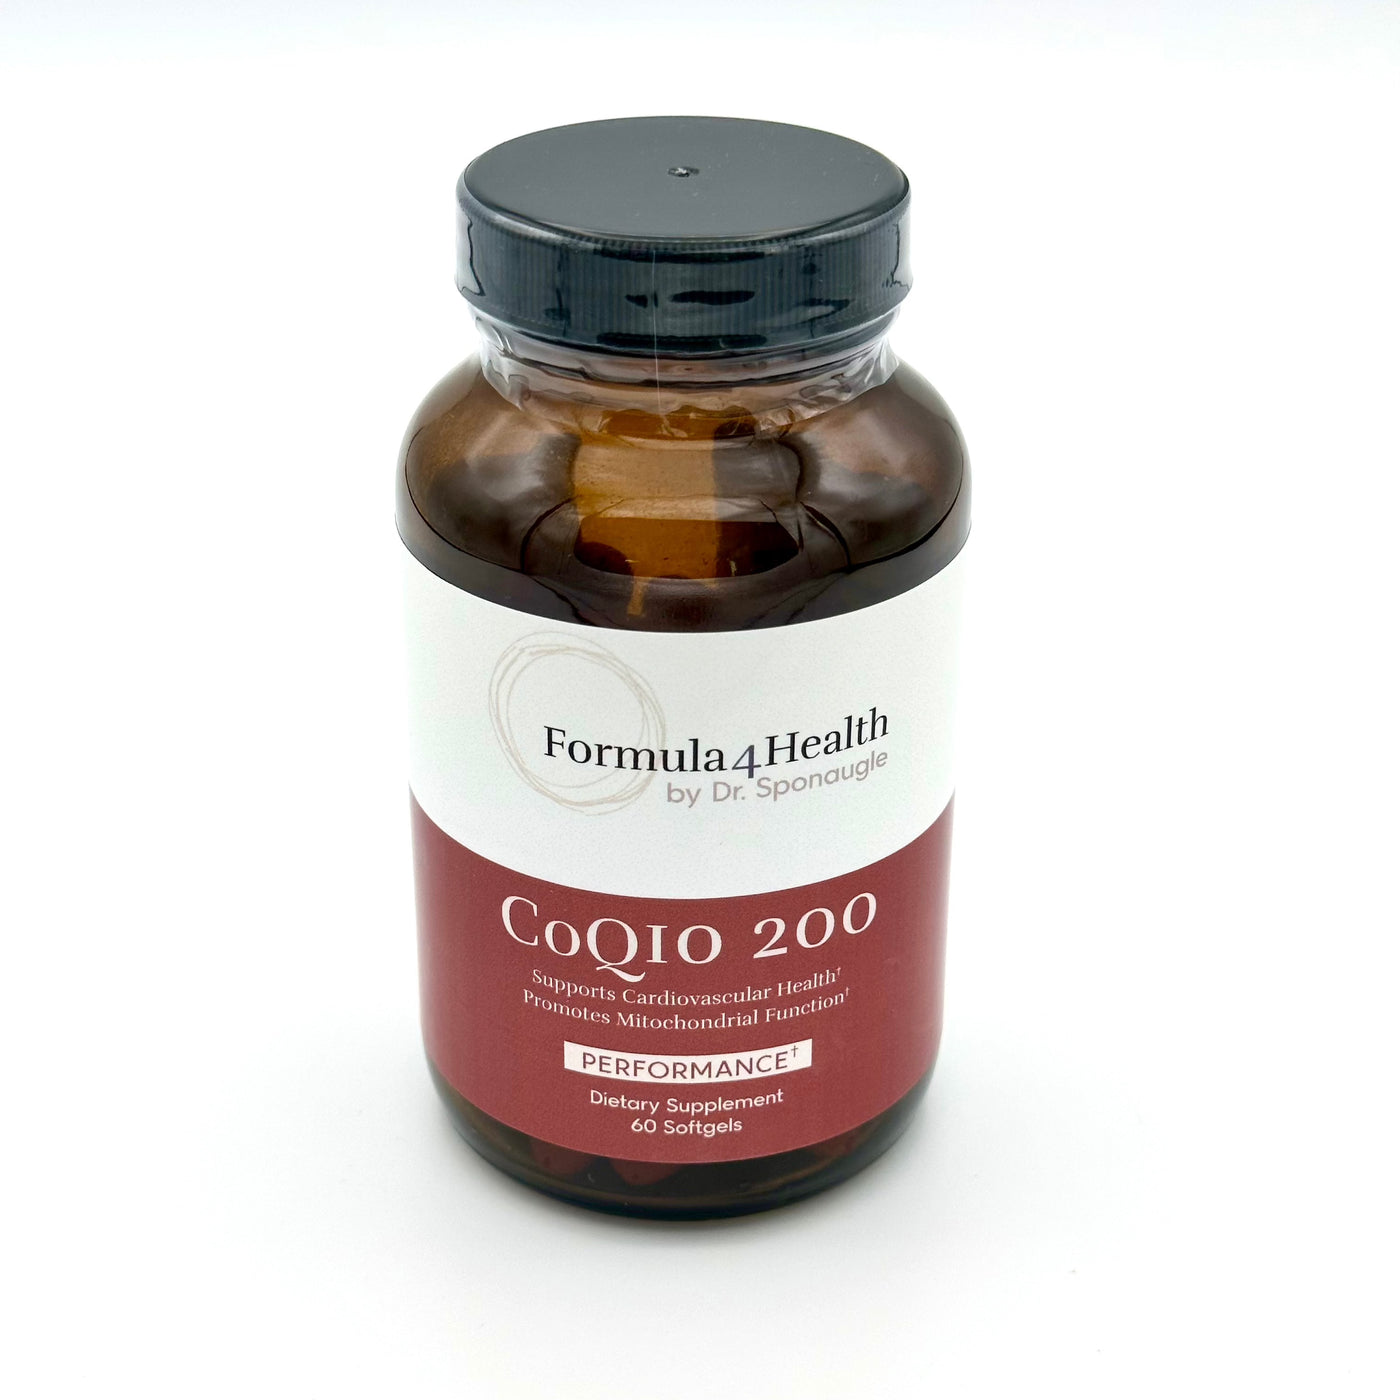 COQ10 200 mg by  Formula 4 Health. Available for online purchase at  Formula For Health.